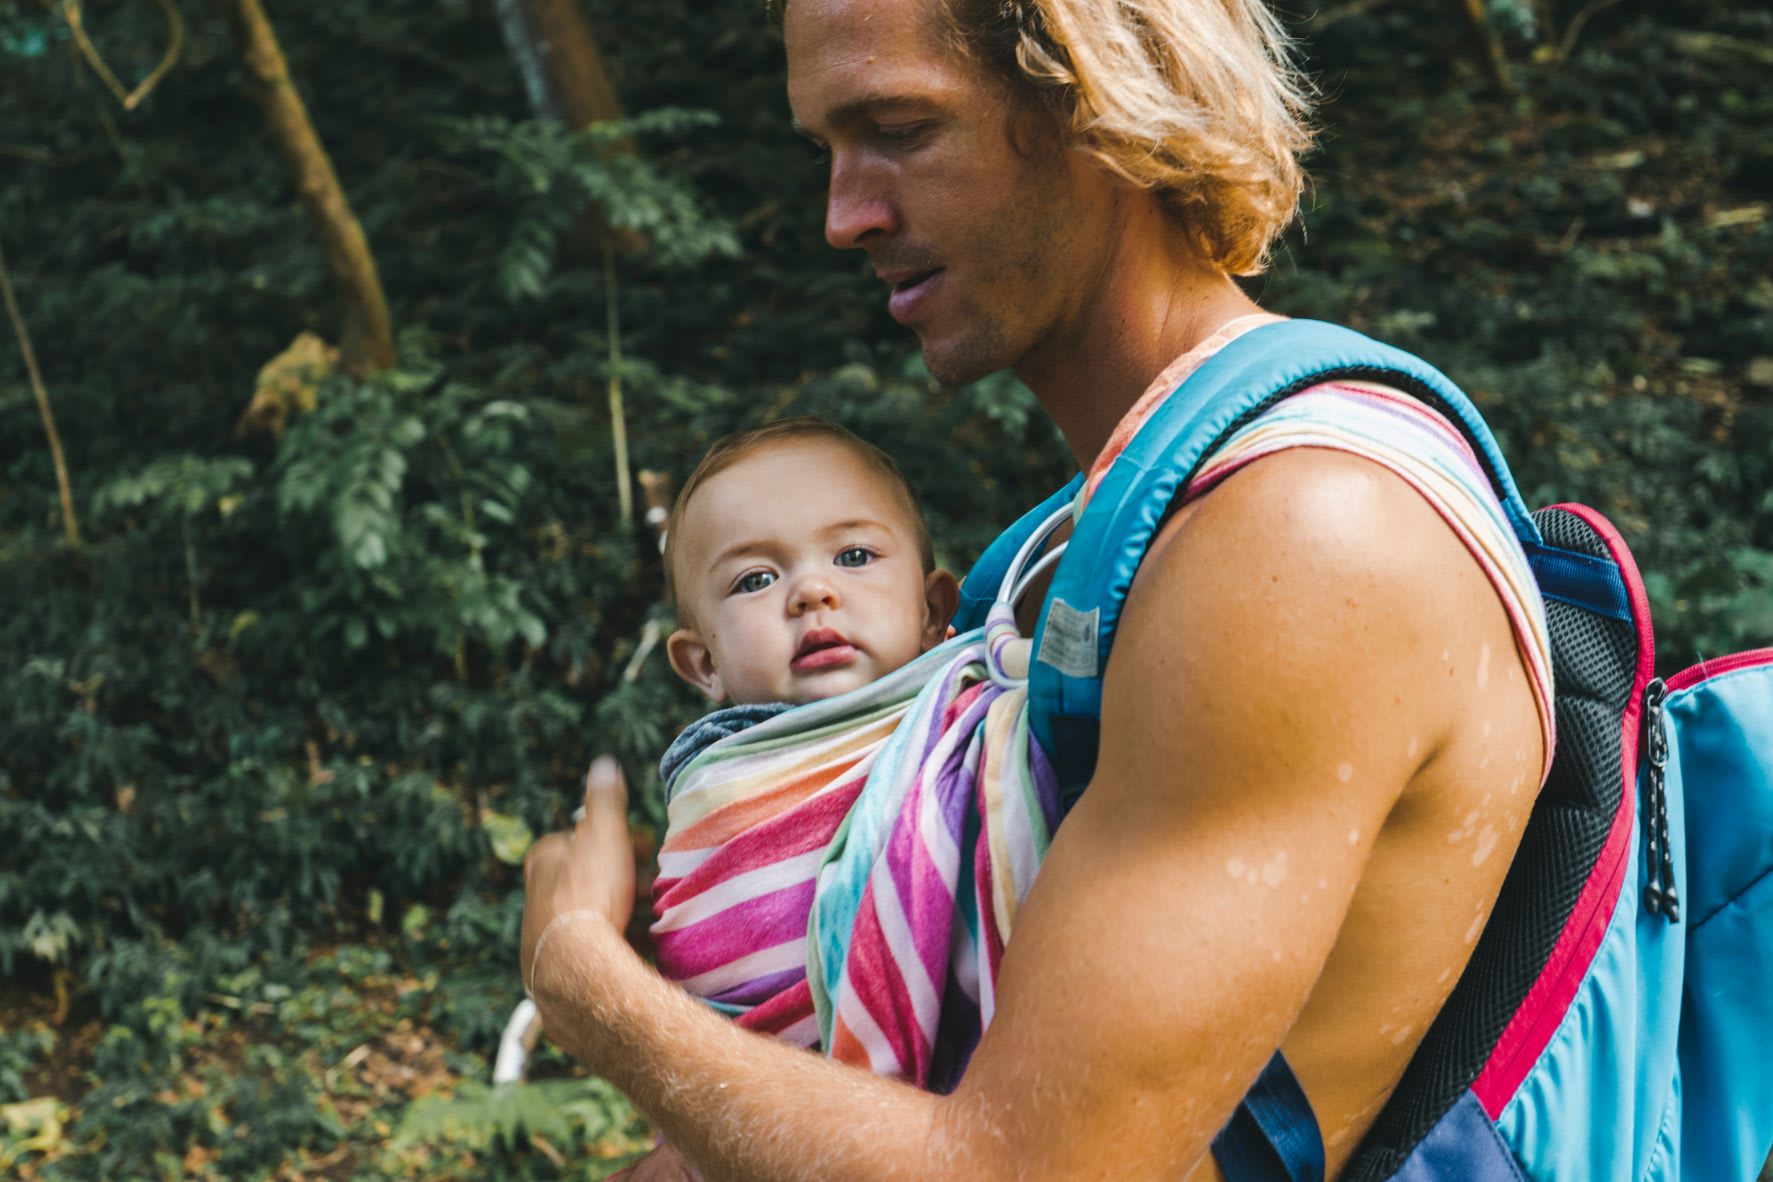 Man holding a baby in a fabric baby sling